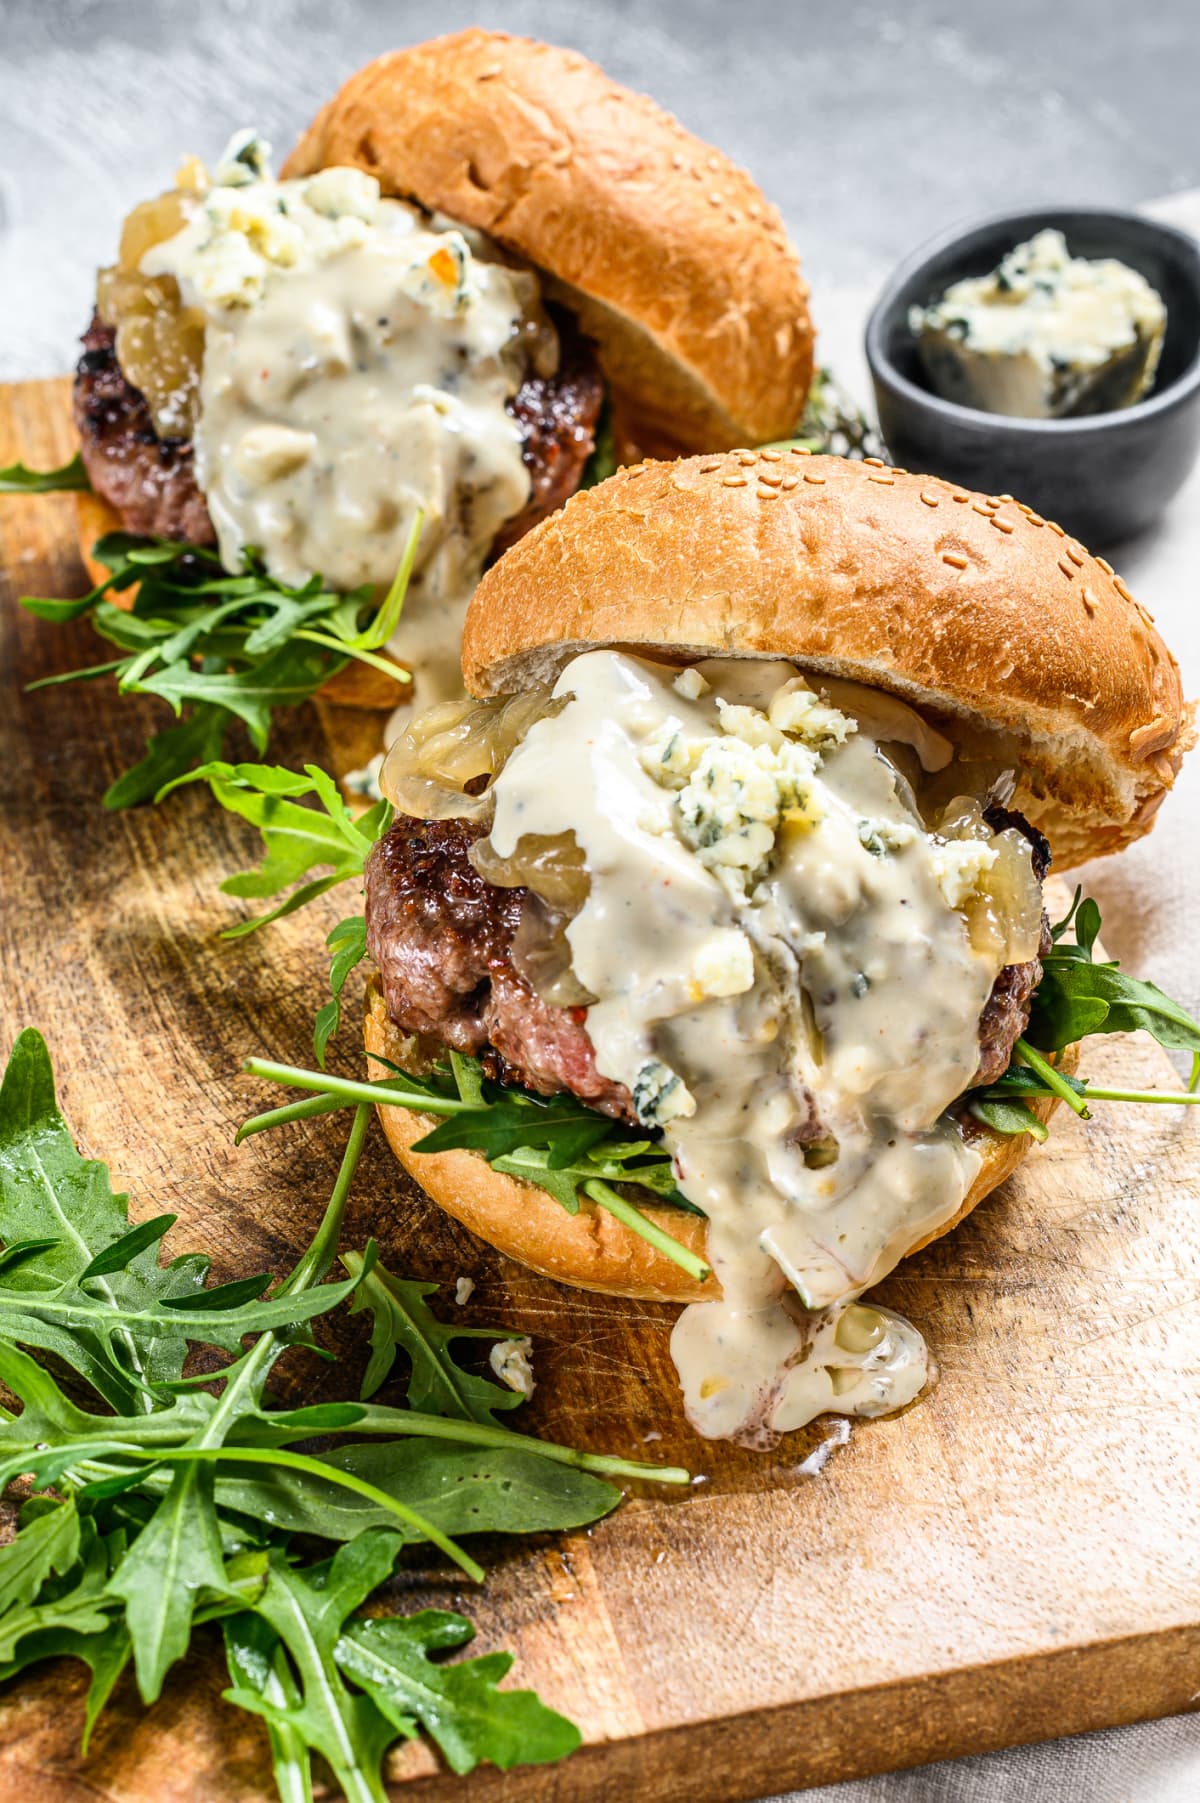 Burgers topped with blue cheese sauce on wooden serving tray with arugula on the side